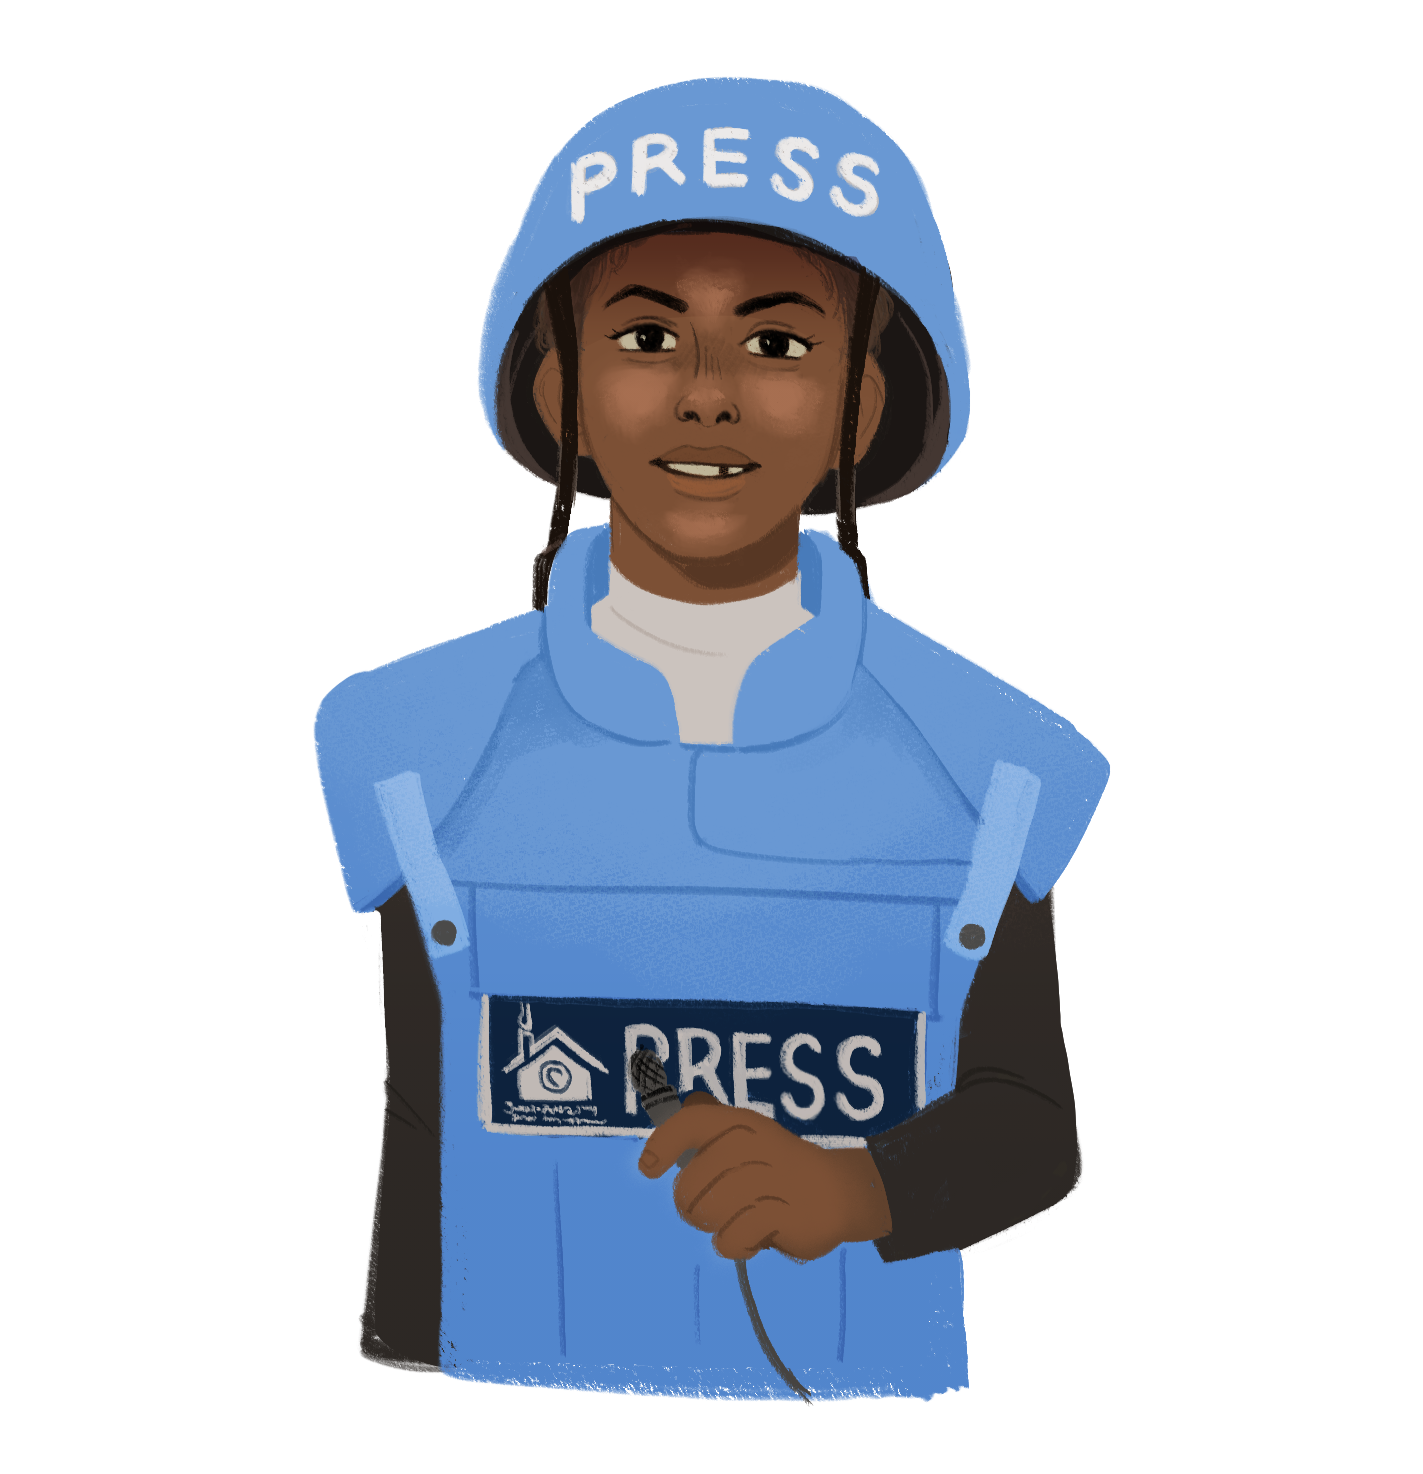 An illustration of Lama Jamous, a nine-year-old Palestinian journalist, in her press uniform featuring a protective hat and vest that says “press.”